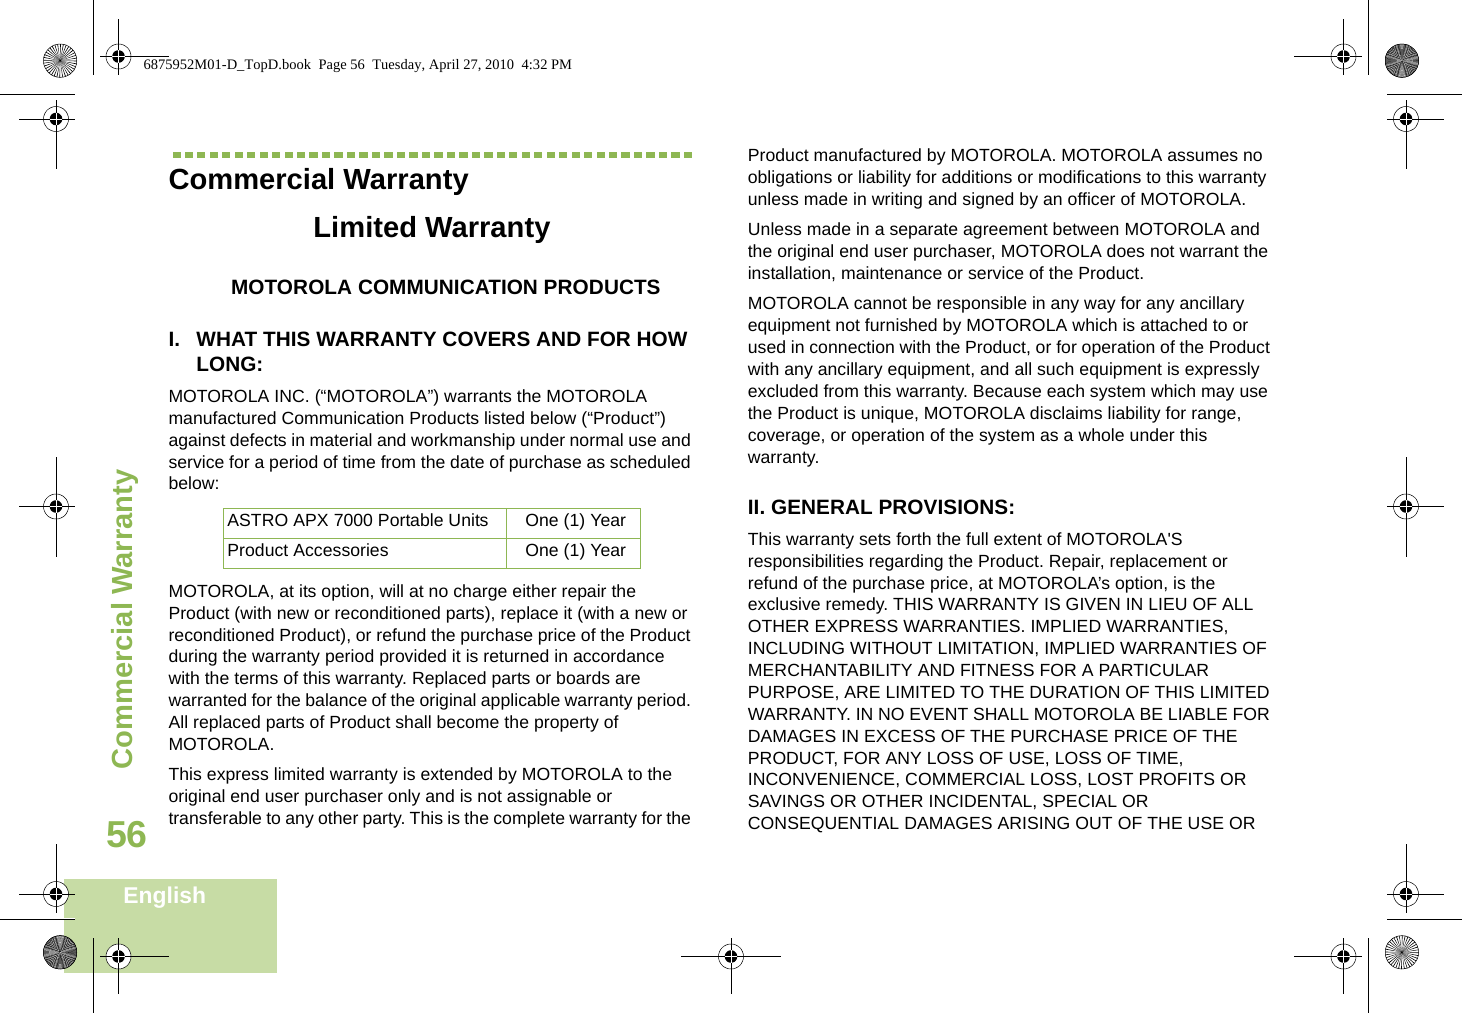 Commercial WarrantyEnglish56Commercial WarrantyLimited WarrantyMOTOROLA COMMUNICATION PRODUCTSI. WHAT THIS WARRANTY COVERS AND FOR HOW LONG:MOTOROLA INC. (“MOTOROLA”) warrants the MOTOROLA manufactured Communication Products listed below (“Product”) against defects in material and workmanship under normal use and service for a period of time from the date of purchase as scheduled below:MOTOROLA, at its option, will at no charge either repair the Product (with new or reconditioned parts), replace it (with a new or reconditioned Product), or refund the purchase price of the Product during the warranty period provided it is returned in accordance with the terms of this warranty. Replaced parts or boards are warranted for the balance of the original applicable warranty period. All replaced parts of Product shall become the property of MOTOROLA.This express limited warranty is extended by MOTOROLA to the original end user purchaser only and is not assignable or transferable to any other party. This is the complete warranty for the Product manufactured by MOTOROLA. MOTOROLA assumes no obligations or liability for additions or modifications to this warranty unless made in writing and signed by an officer of MOTOROLA. Unless made in a separate agreement between MOTOROLA and the original end user purchaser, MOTOROLA does not warrant the installation, maintenance or service of the Product.MOTOROLA cannot be responsible in any way for any ancillary equipment not furnished by MOTOROLA which is attached to or used in connection with the Product, or for operation of the Product with any ancillary equipment, and all such equipment is expressly excluded from this warranty. Because each system which may use the Product is unique, MOTOROLA disclaims liability for range, coverage, or operation of the system as a whole under this warranty.II. GENERAL PROVISIONS:This warranty sets forth the full extent of MOTOROLA&apos;S responsibilities regarding the Product. Repair, replacement or refund of the purchase price, at MOTOROLA’s option, is the exclusive remedy. THIS WARRANTY IS GIVEN IN LIEU OF ALL OTHER EXPRESS WARRANTIES. IMPLIED WARRANTIES, INCLUDING WITHOUT LIMITATION, IMPLIED WARRANTIES OF MERCHANTABILITY AND FITNESS FOR A PARTICULAR PURPOSE, ARE LIMITED TO THE DURATION OF THIS LIMITED WARRANTY. IN NO EVENT SHALL MOTOROLA BE LIABLE FOR DAMAGES IN EXCESS OF THE PURCHASE PRICE OF THE PRODUCT, FOR ANY LOSS OF USE, LOSS OF TIME, INCONVENIENCE, COMMERCIAL LOSS, LOST PROFITS OR SAVINGS OR OTHER INCIDENTAL, SPECIAL OR CONSEQUENTIAL DAMAGES ARISING OUT OF THE USE OR ASTRO APX 7000 Portable Units One (1) YearProduct Accessories One (1) Year6875952M01-D_TopD.book  Page 56  Tuesday, April 27, 2010  4:32 PM